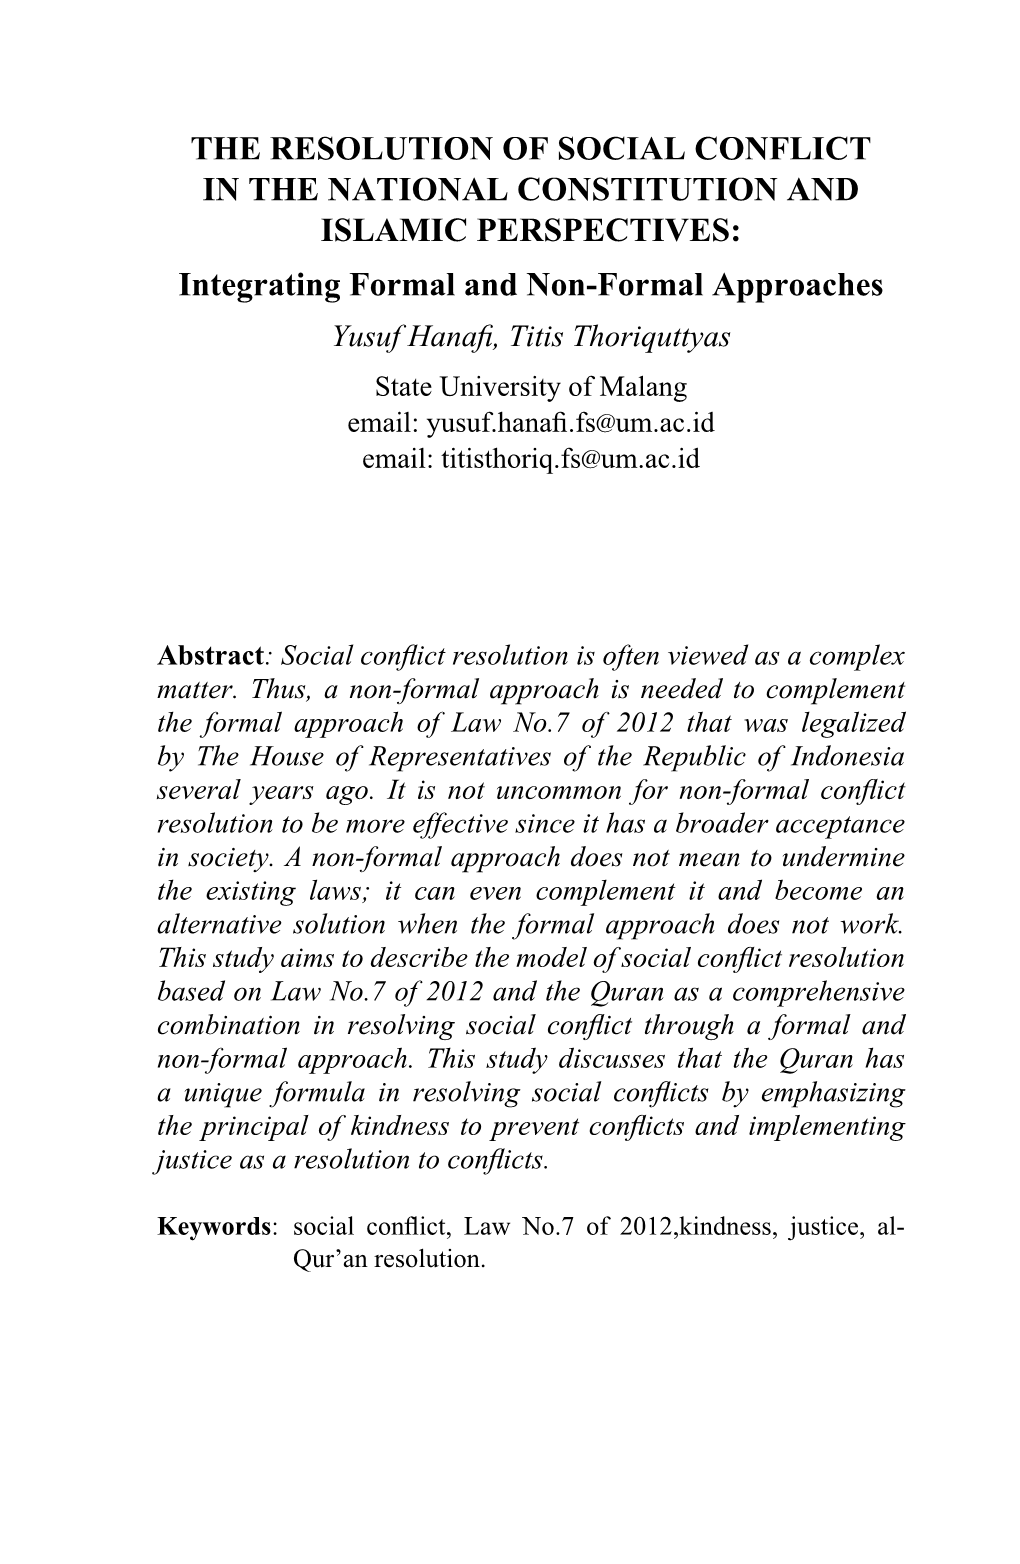 THE RESOLUTION of SOCIAL CONFLICT in the NATIONAL CONSTITUTION and ISLAMIC PERSPECTIVES: Integrating Formal and Non-Formal Appro